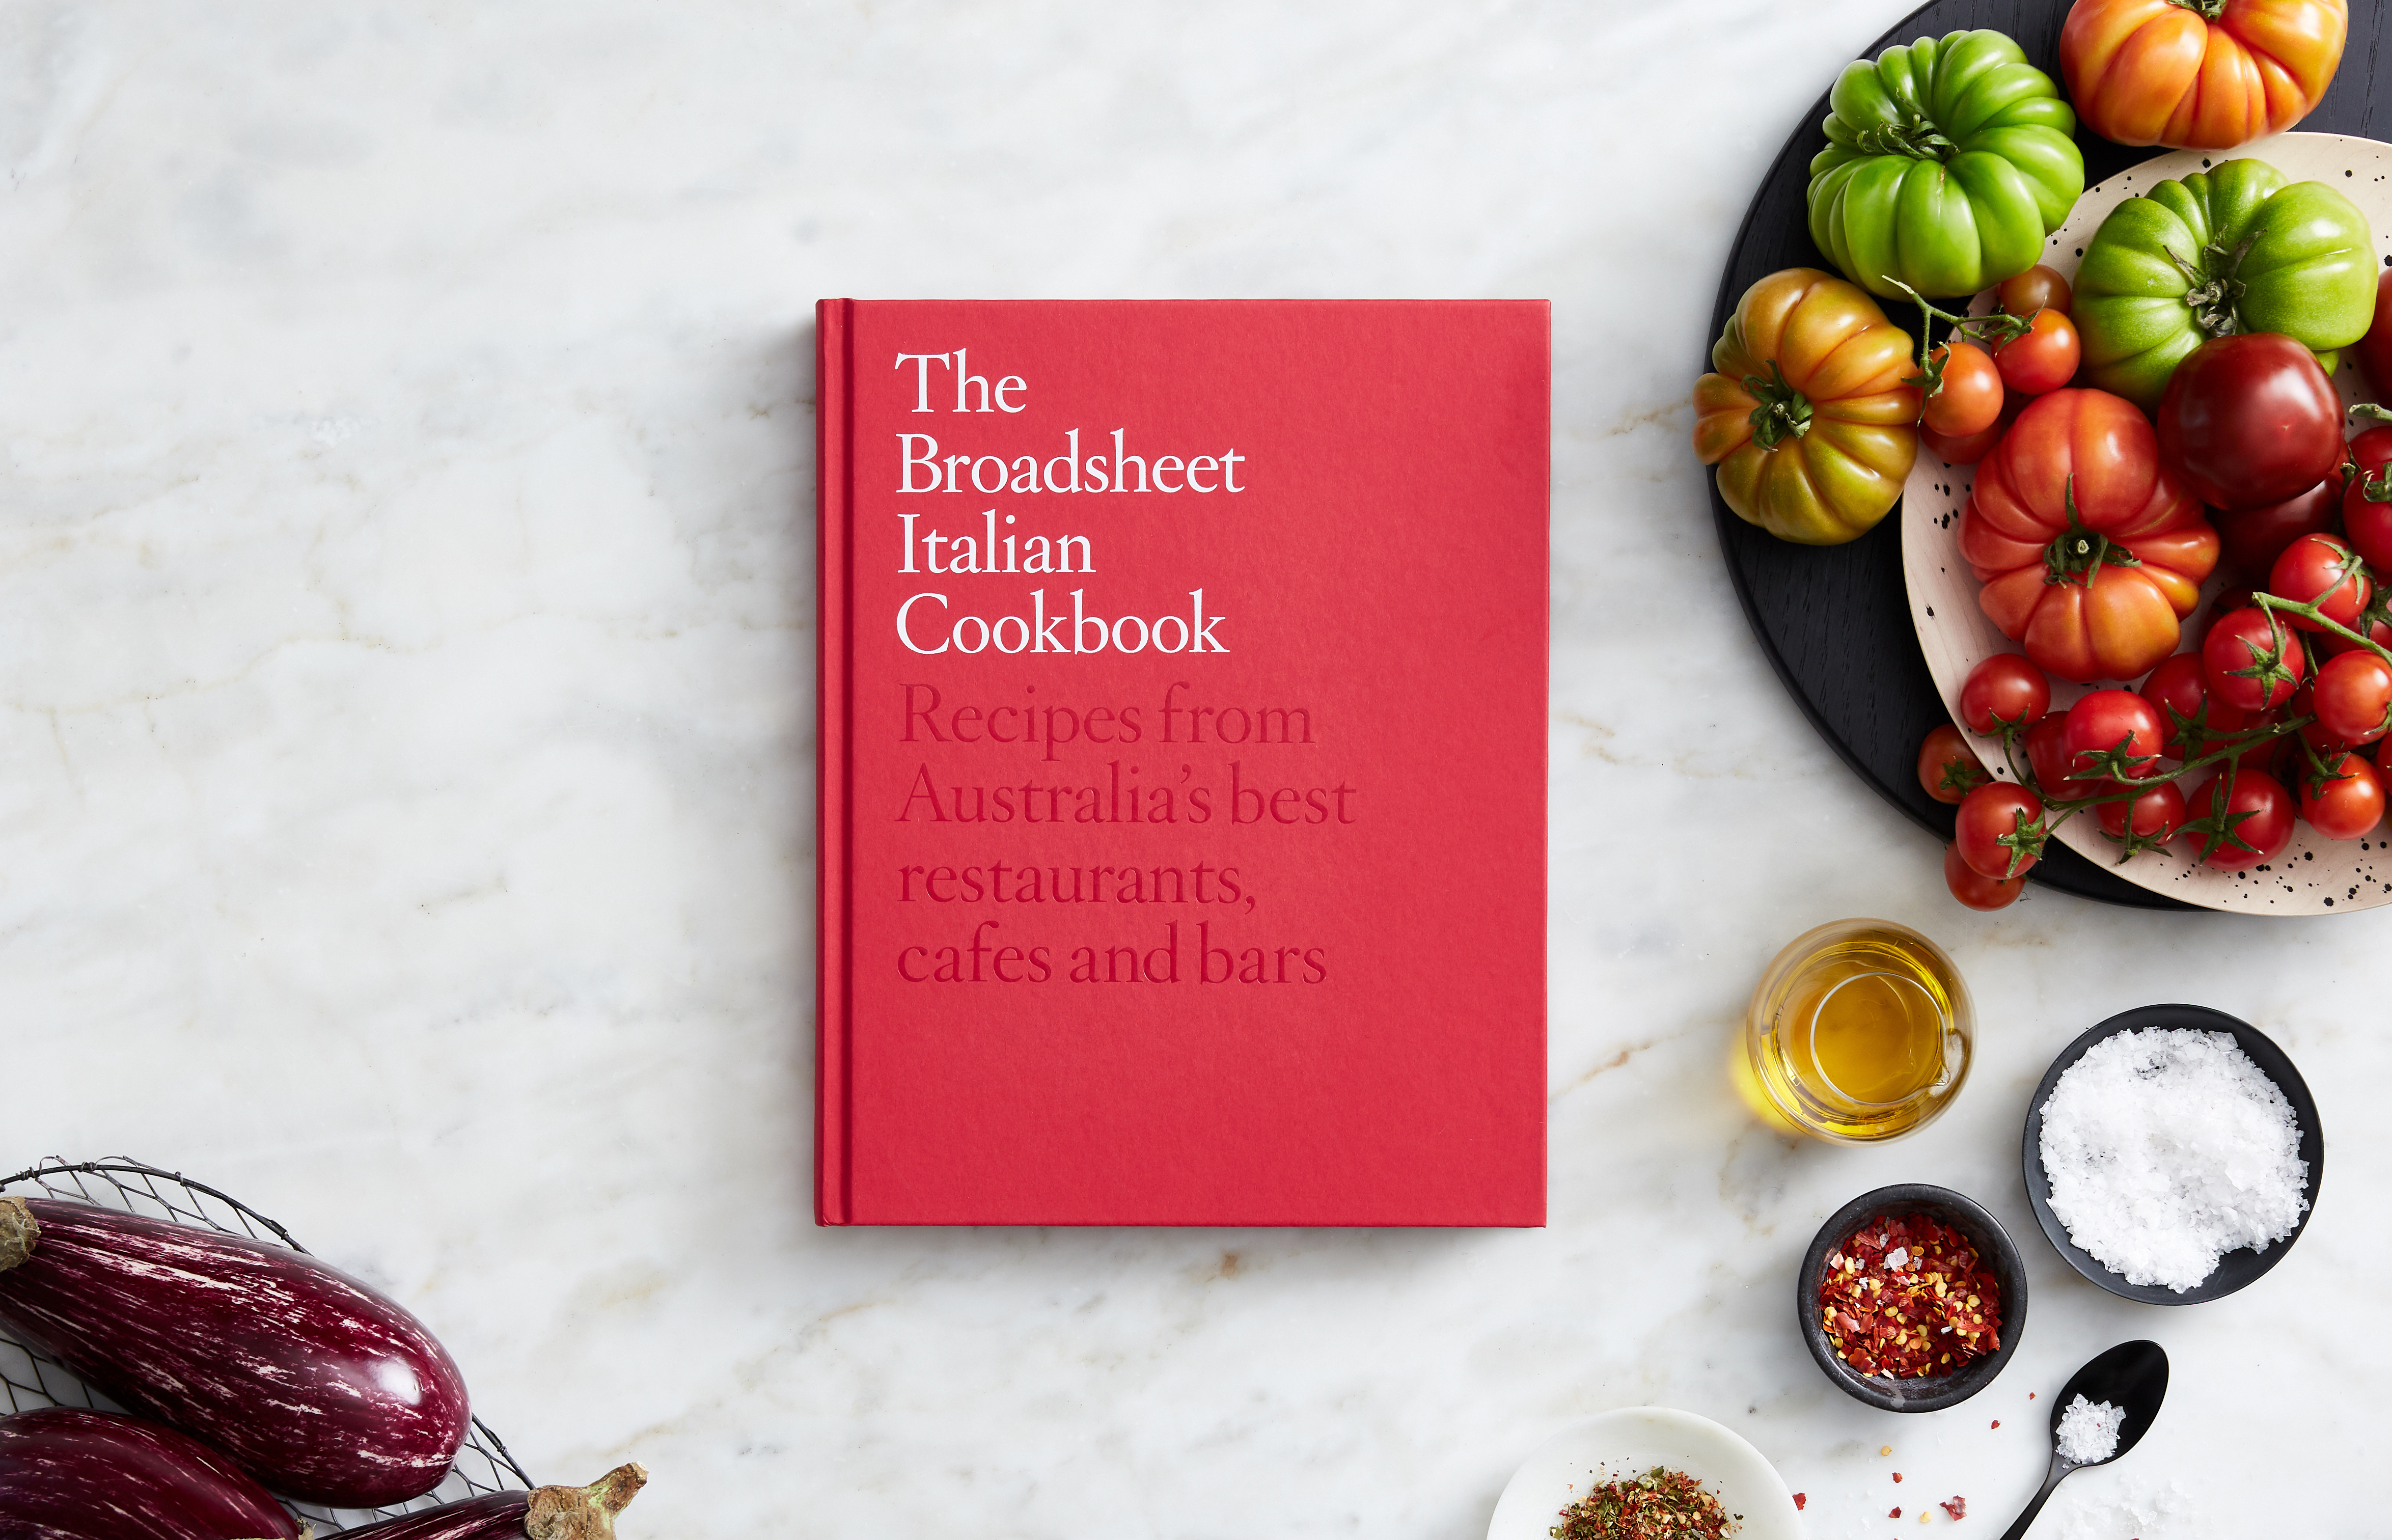 October 2018 – The Broadsheet Italian Cookbook goes on sale | Photography by Peter Marko
